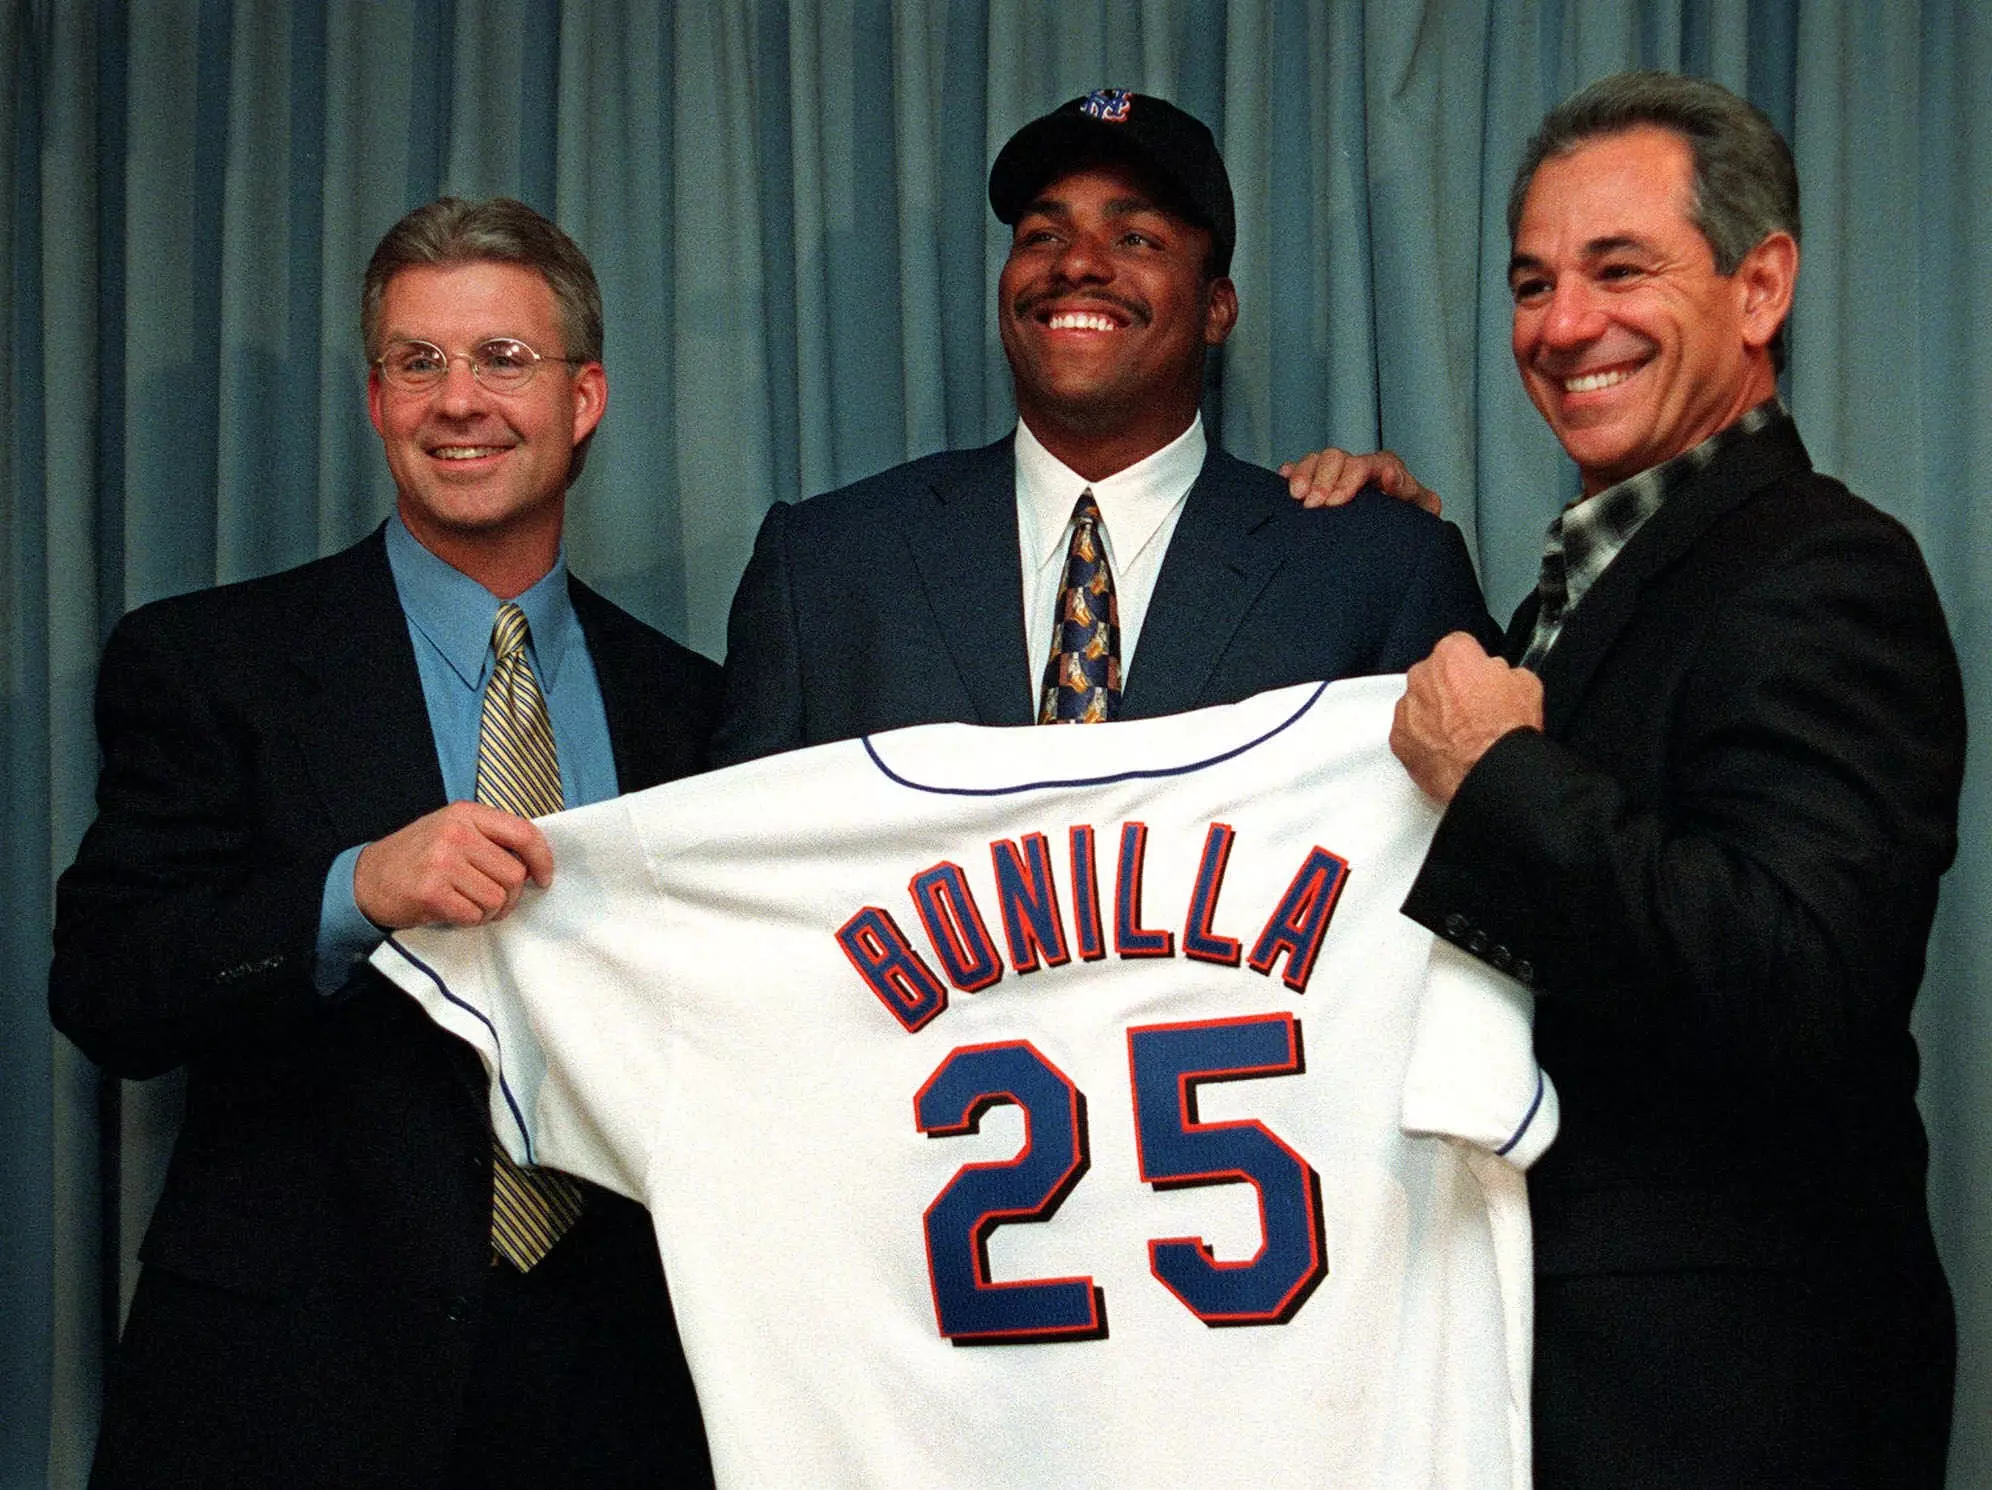 The story of Bonilla and the Mets is a remarkable one.